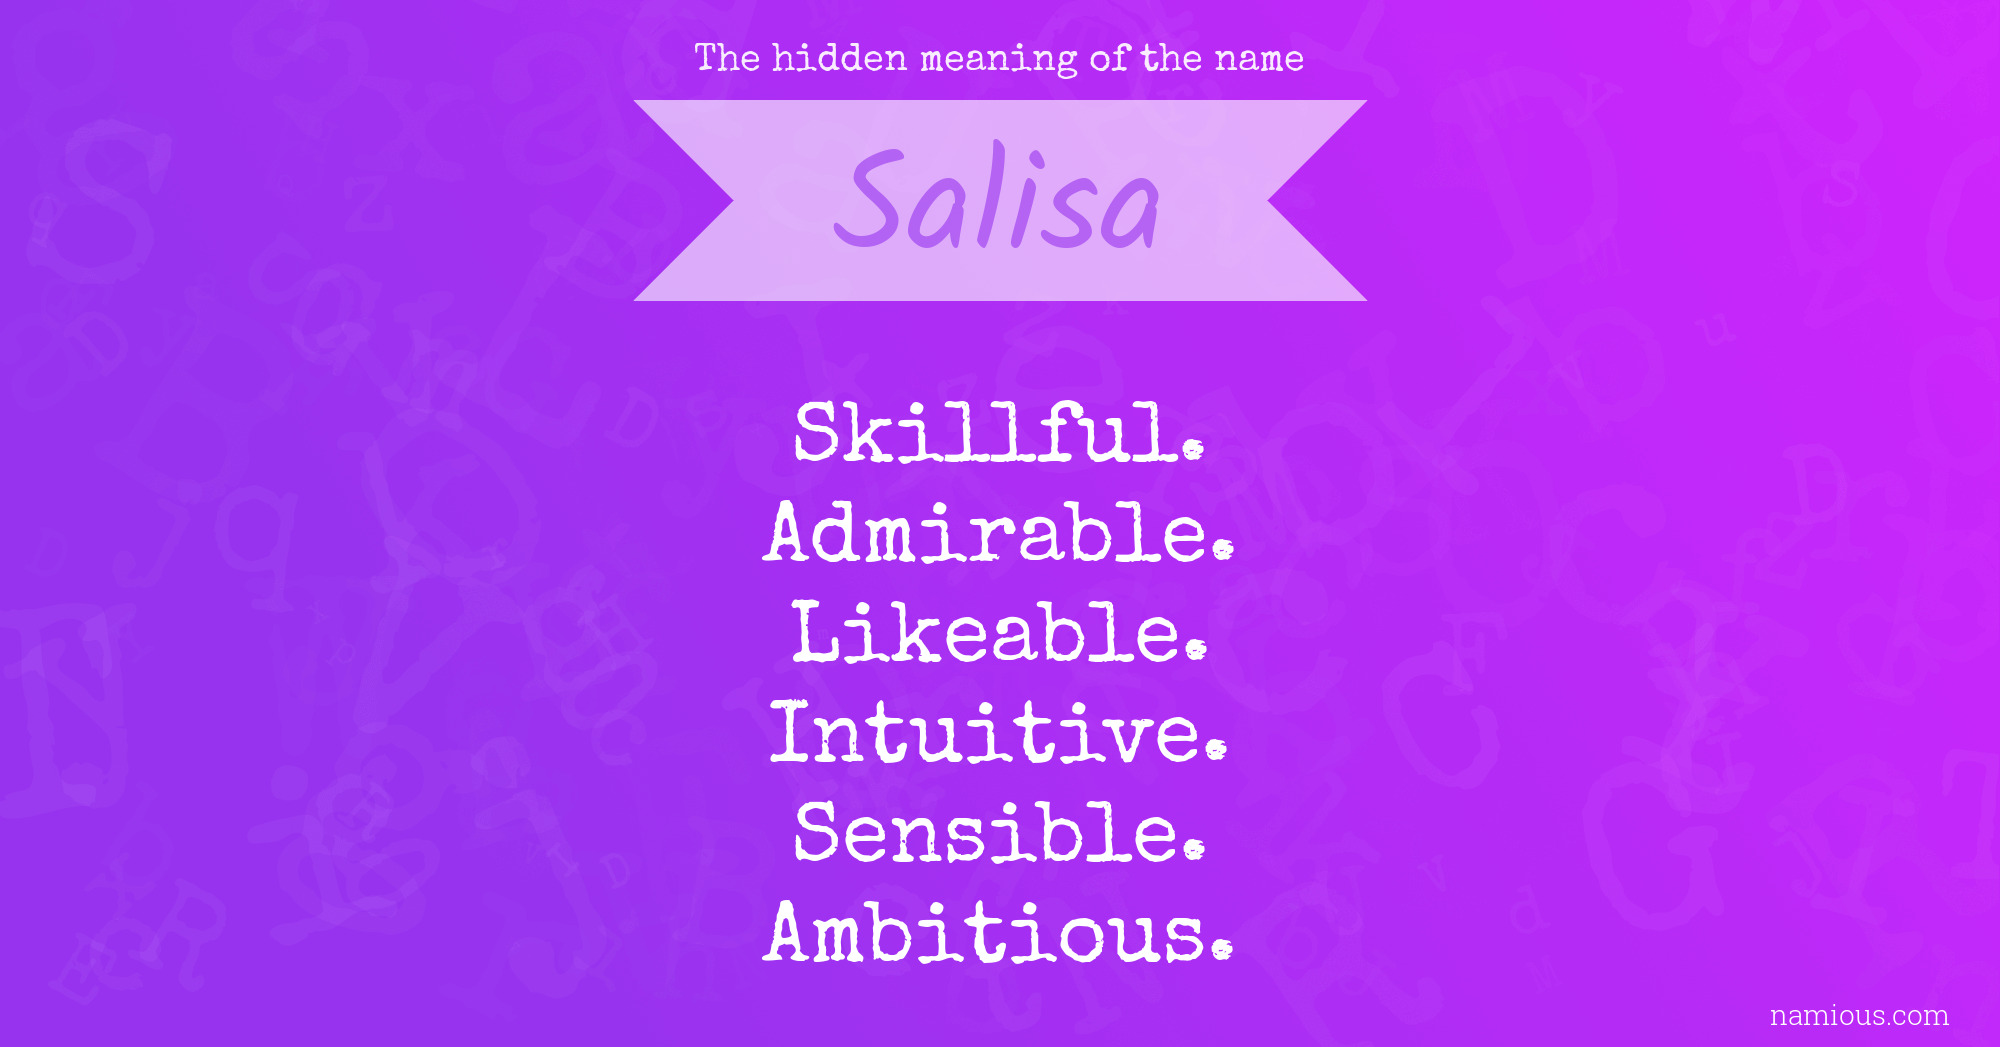 The hidden meaning of the name Salisa | Namious